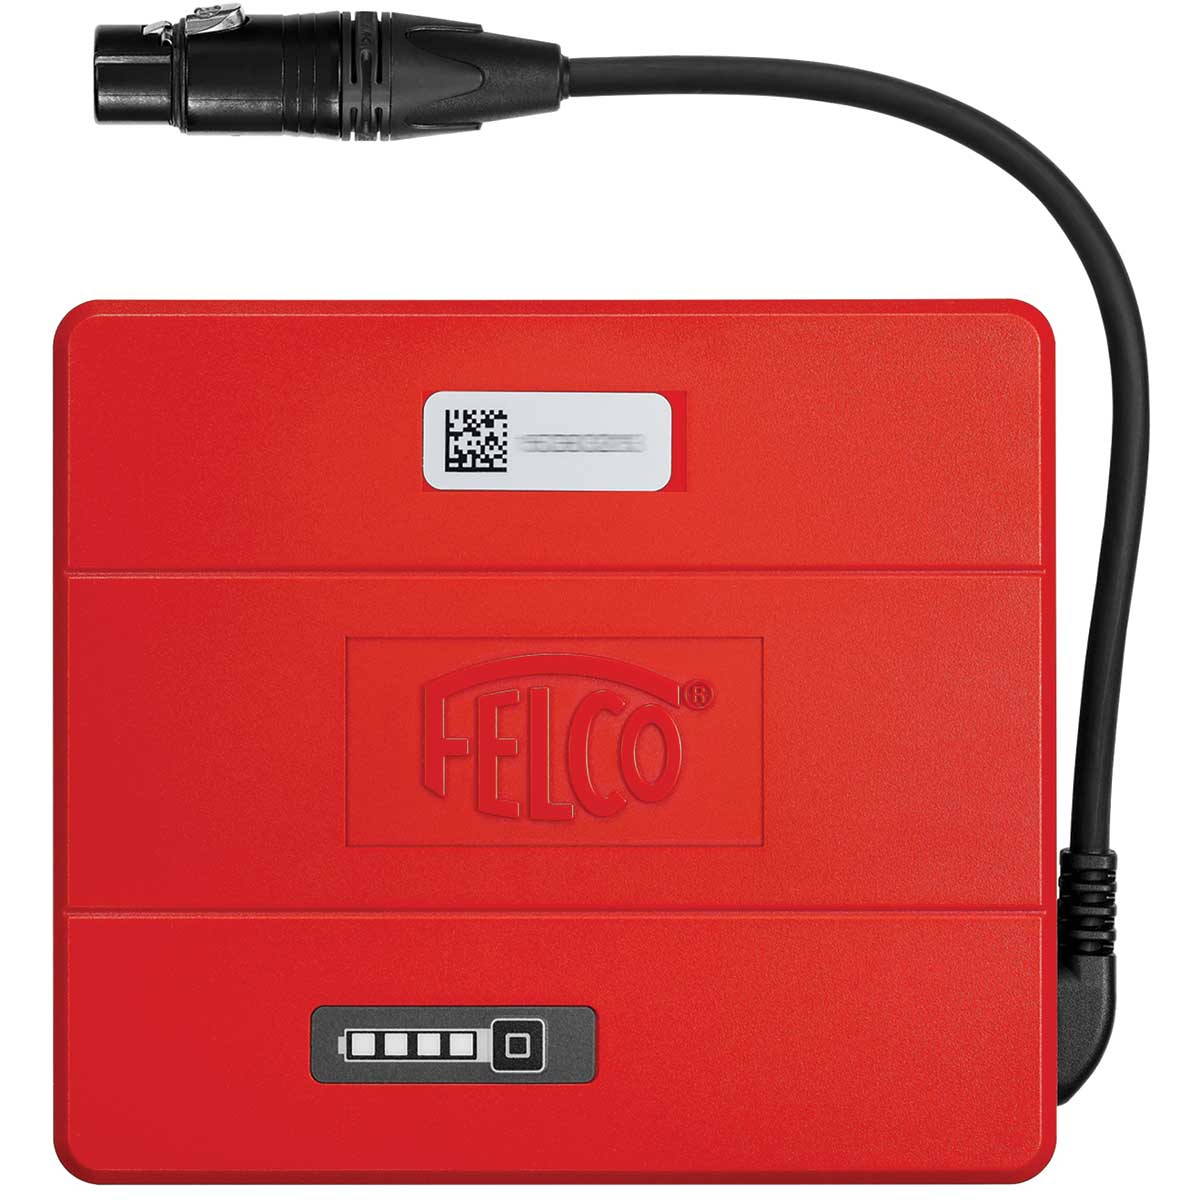 FELCO® 812 Electric Pruner Kit with Standard Capacity Battery